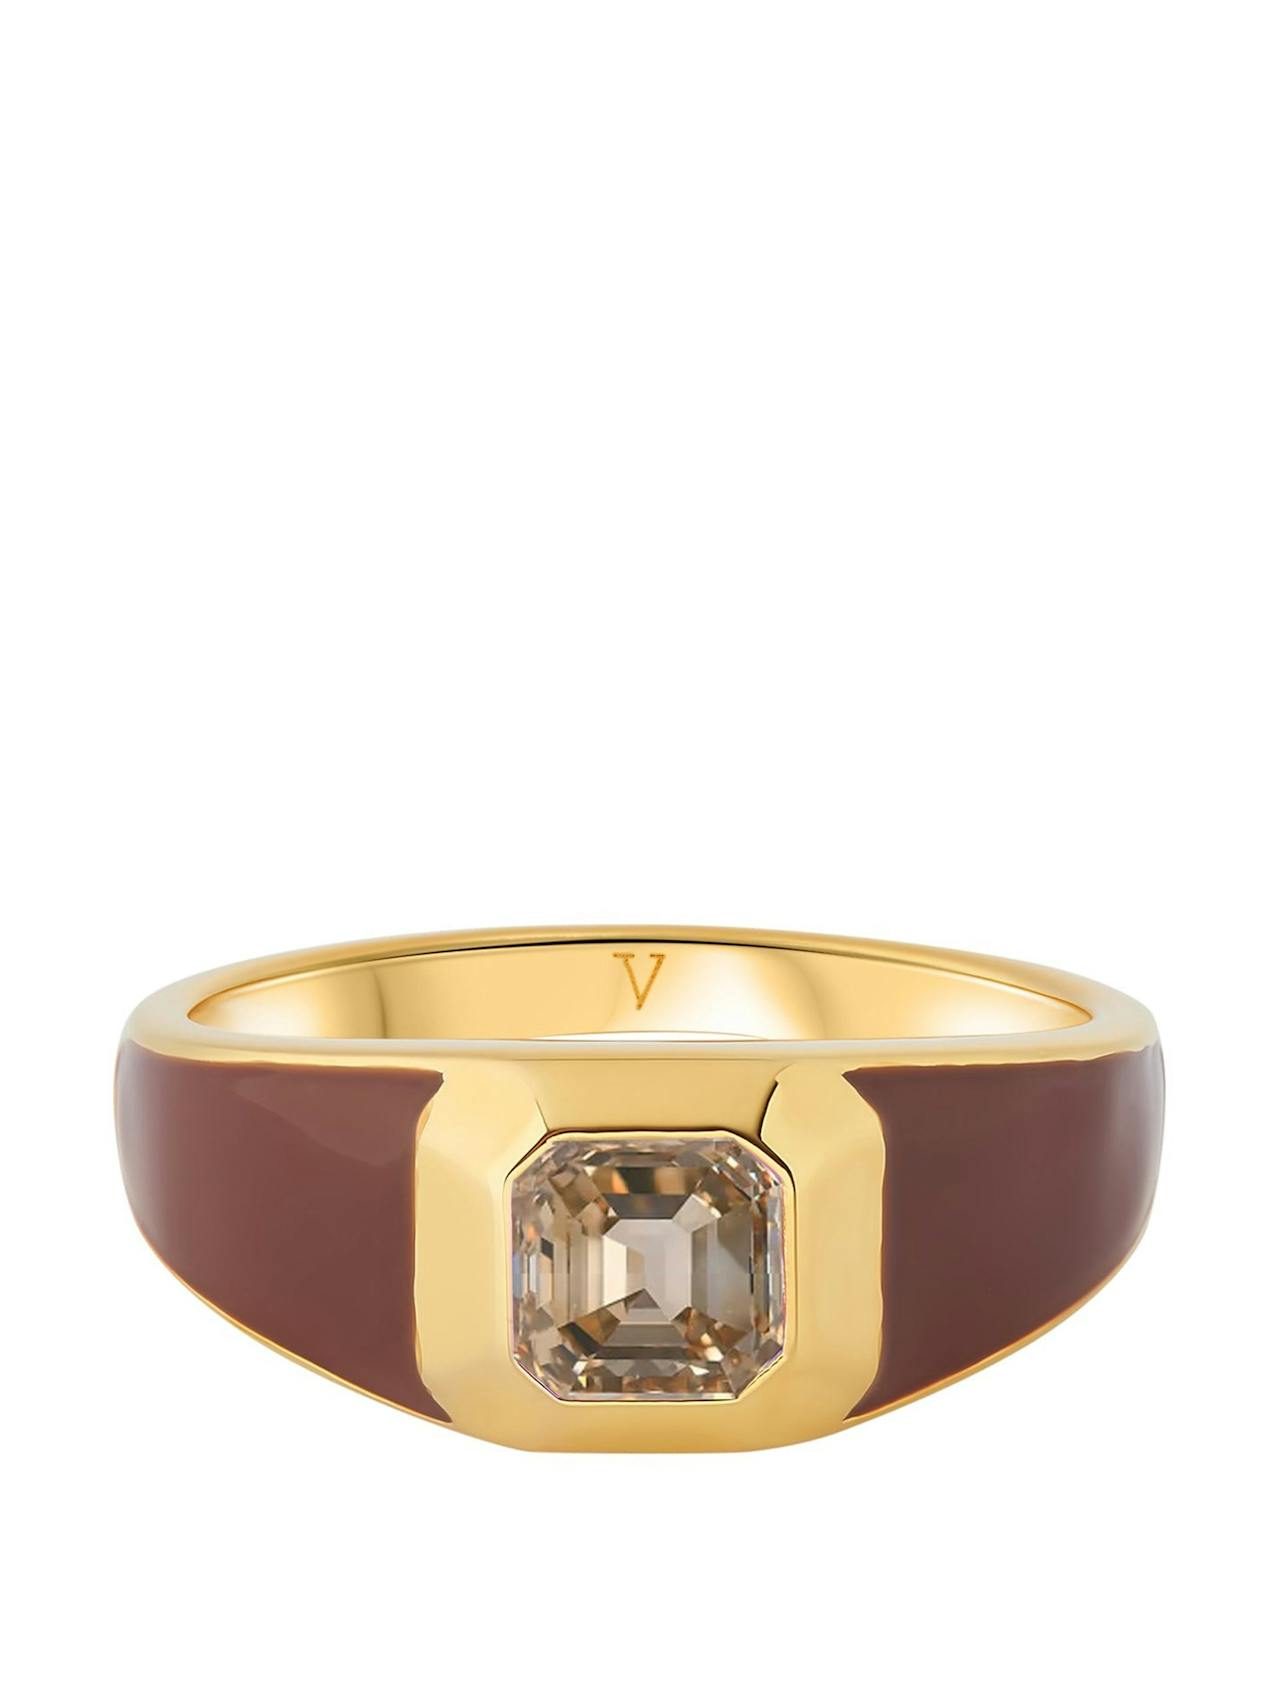 Sophie brown enamel signet ring with champagne stone